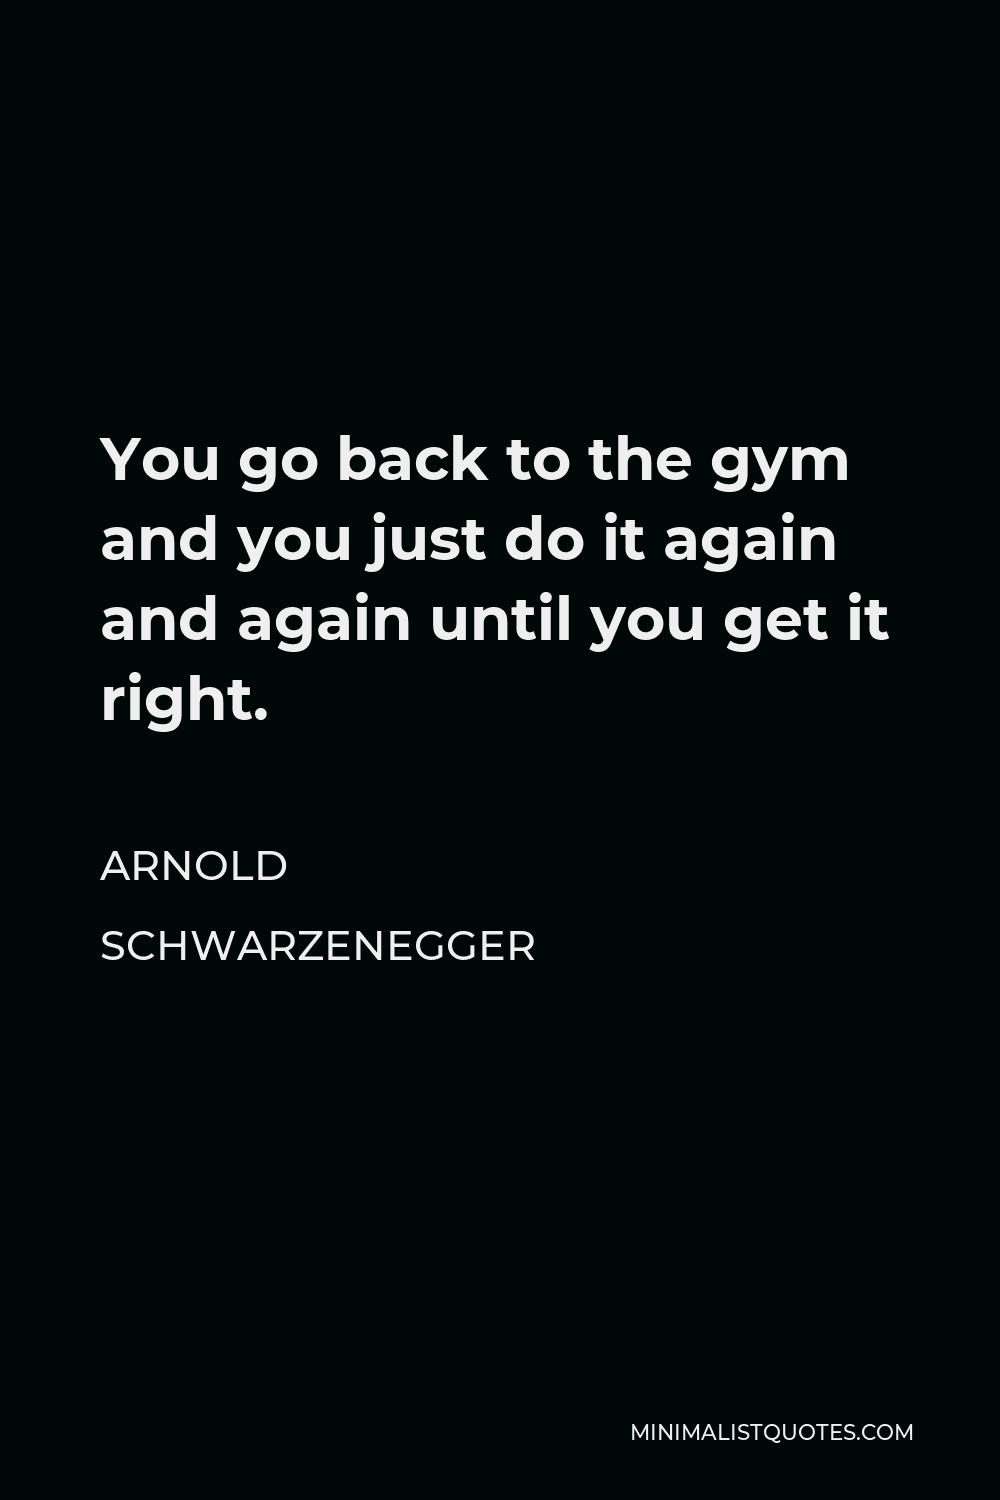 Arnold Schwarzenegger Quote - You go back to the gym and you just do it again and again until you get it right.